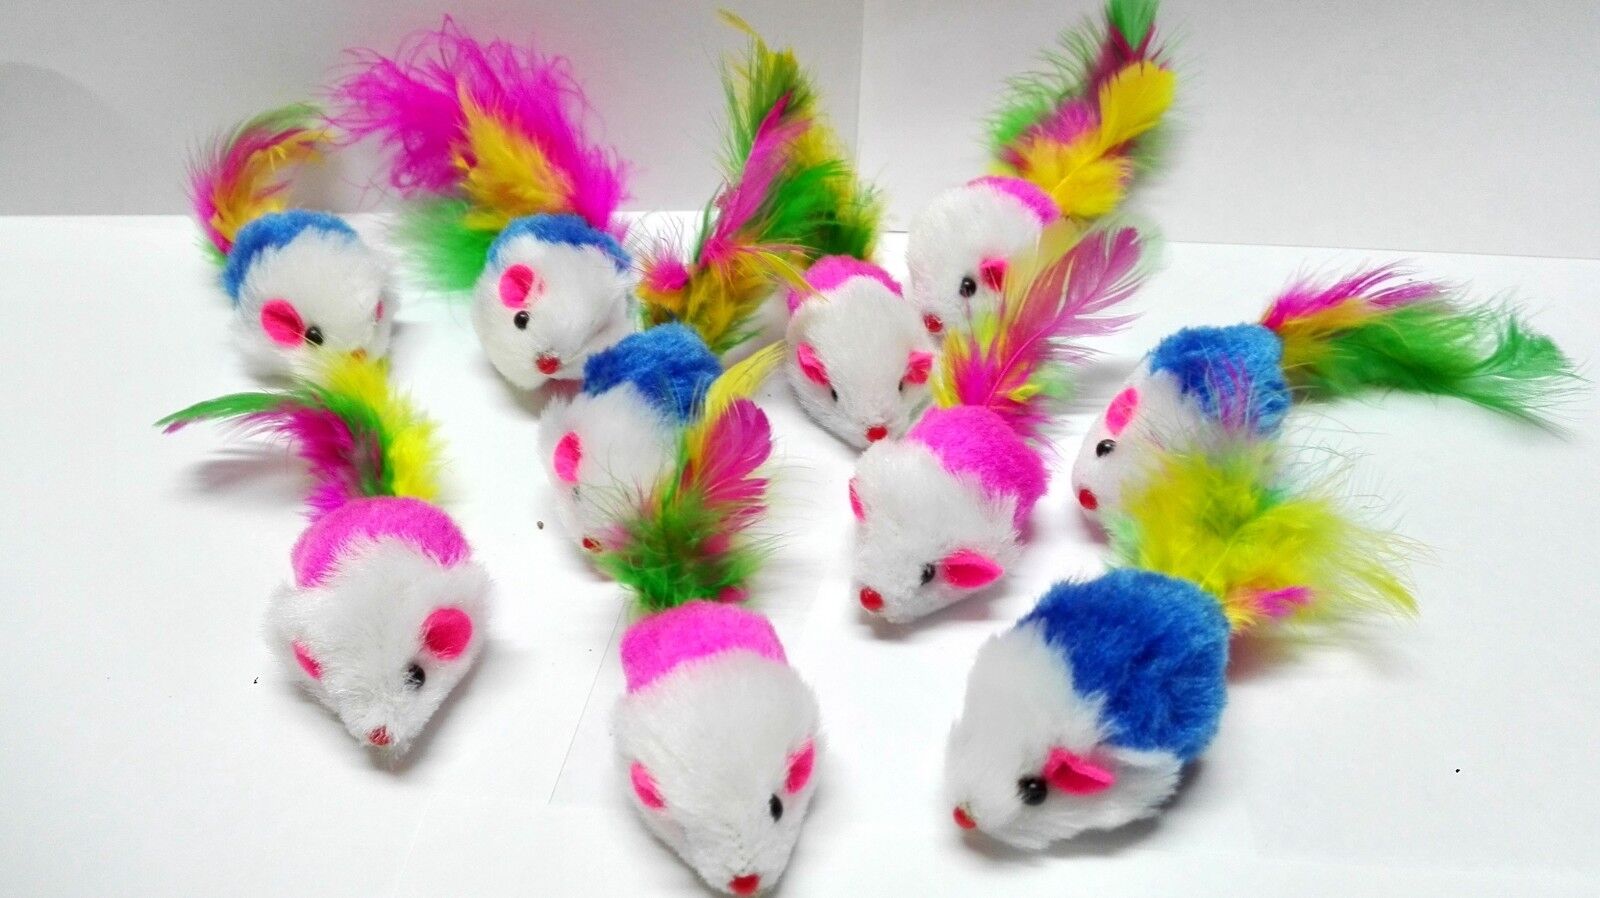 Fur Mice Cat Toys, Soft and Durable for Play , Catnip Mice for kittens. 10 pcs